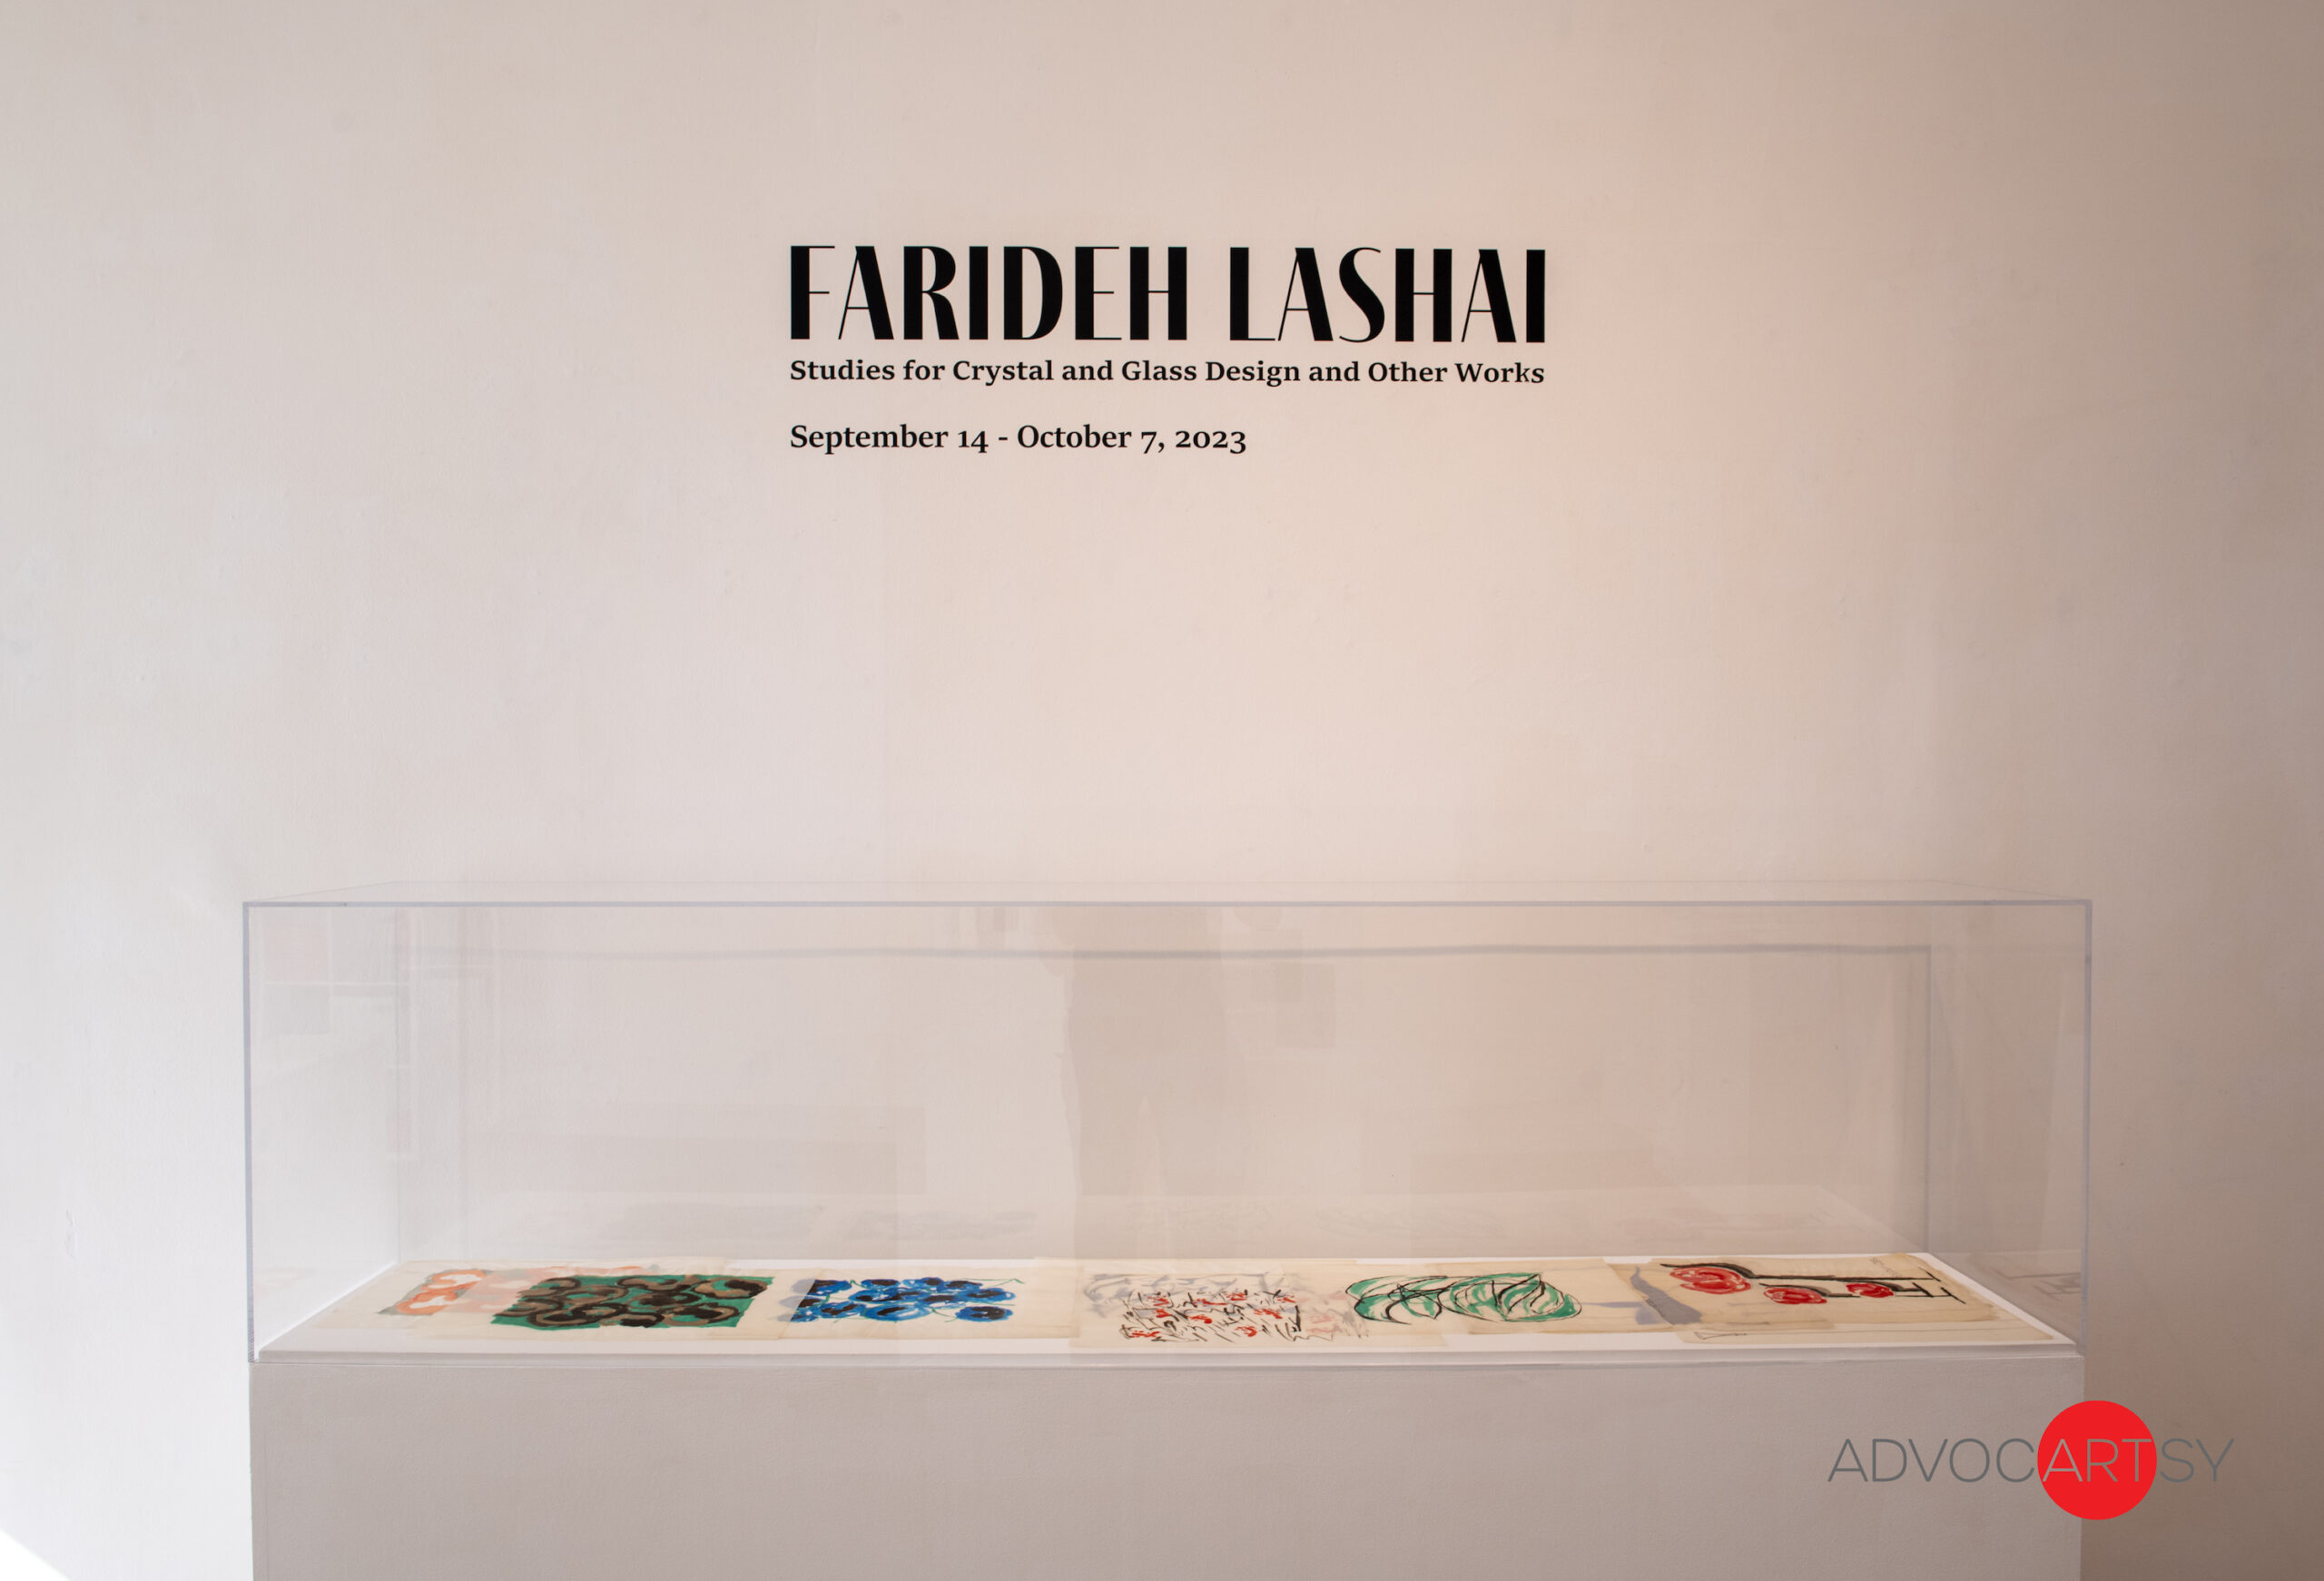 The entrance to Farideh Lashai's show at ADVOCARTSY reads "Farideh Lashai...Studies for Crystal and Glass Design and Other Works...September 14 - October 7, 2023)."